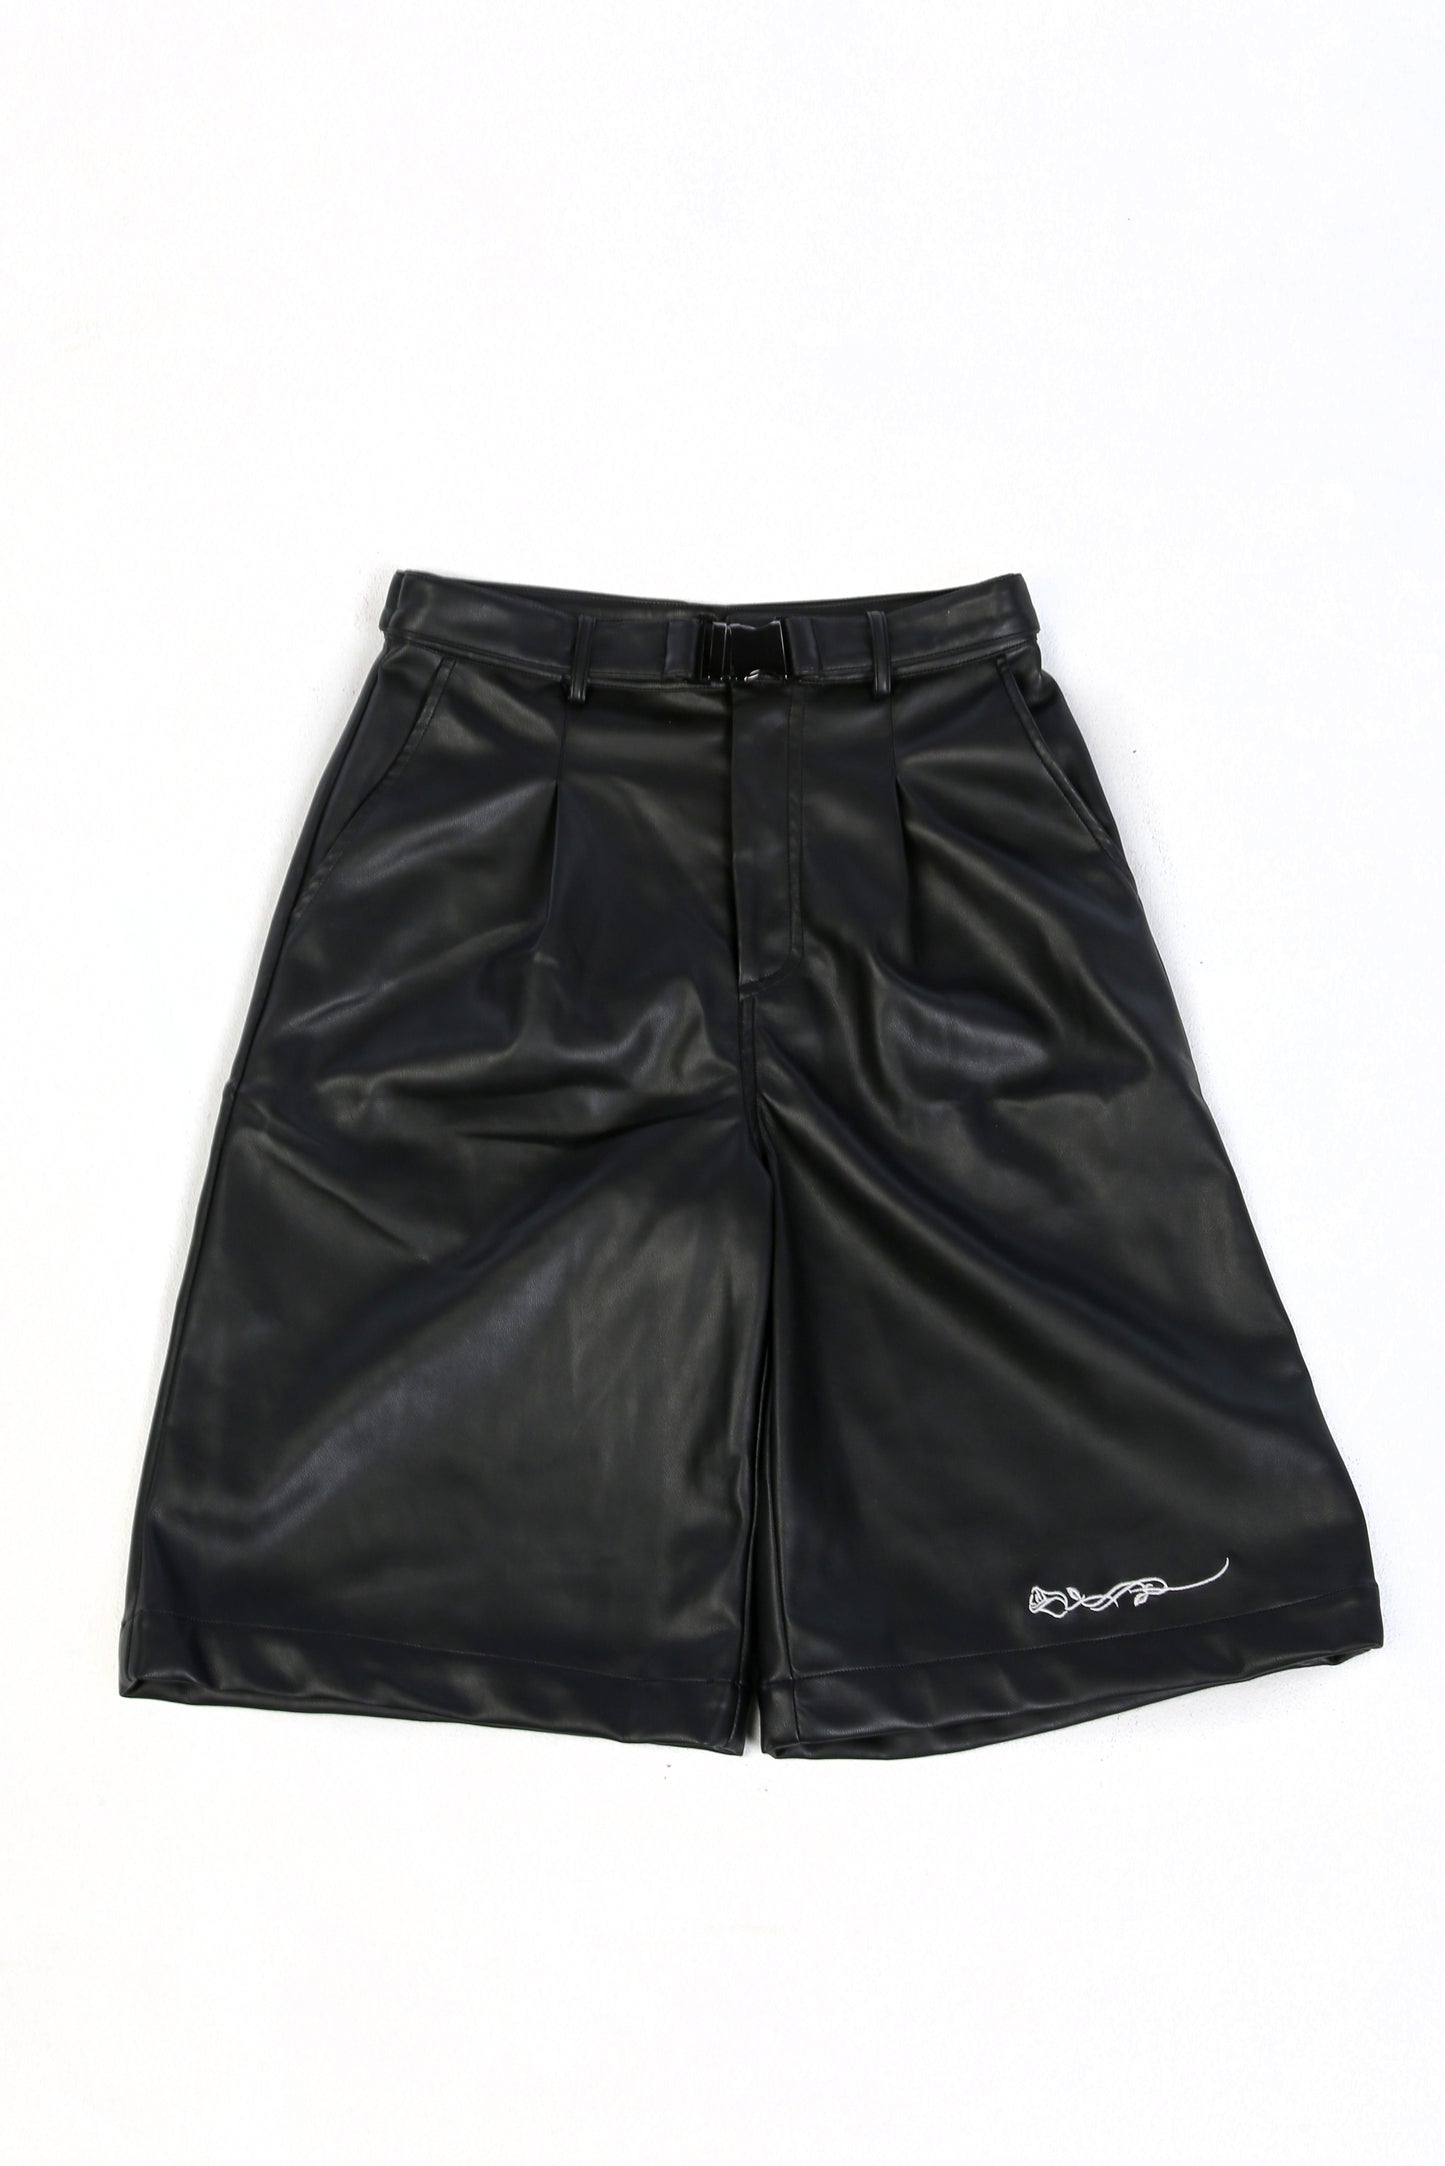 Black faux leather wide leg shorts with buckled belt strap